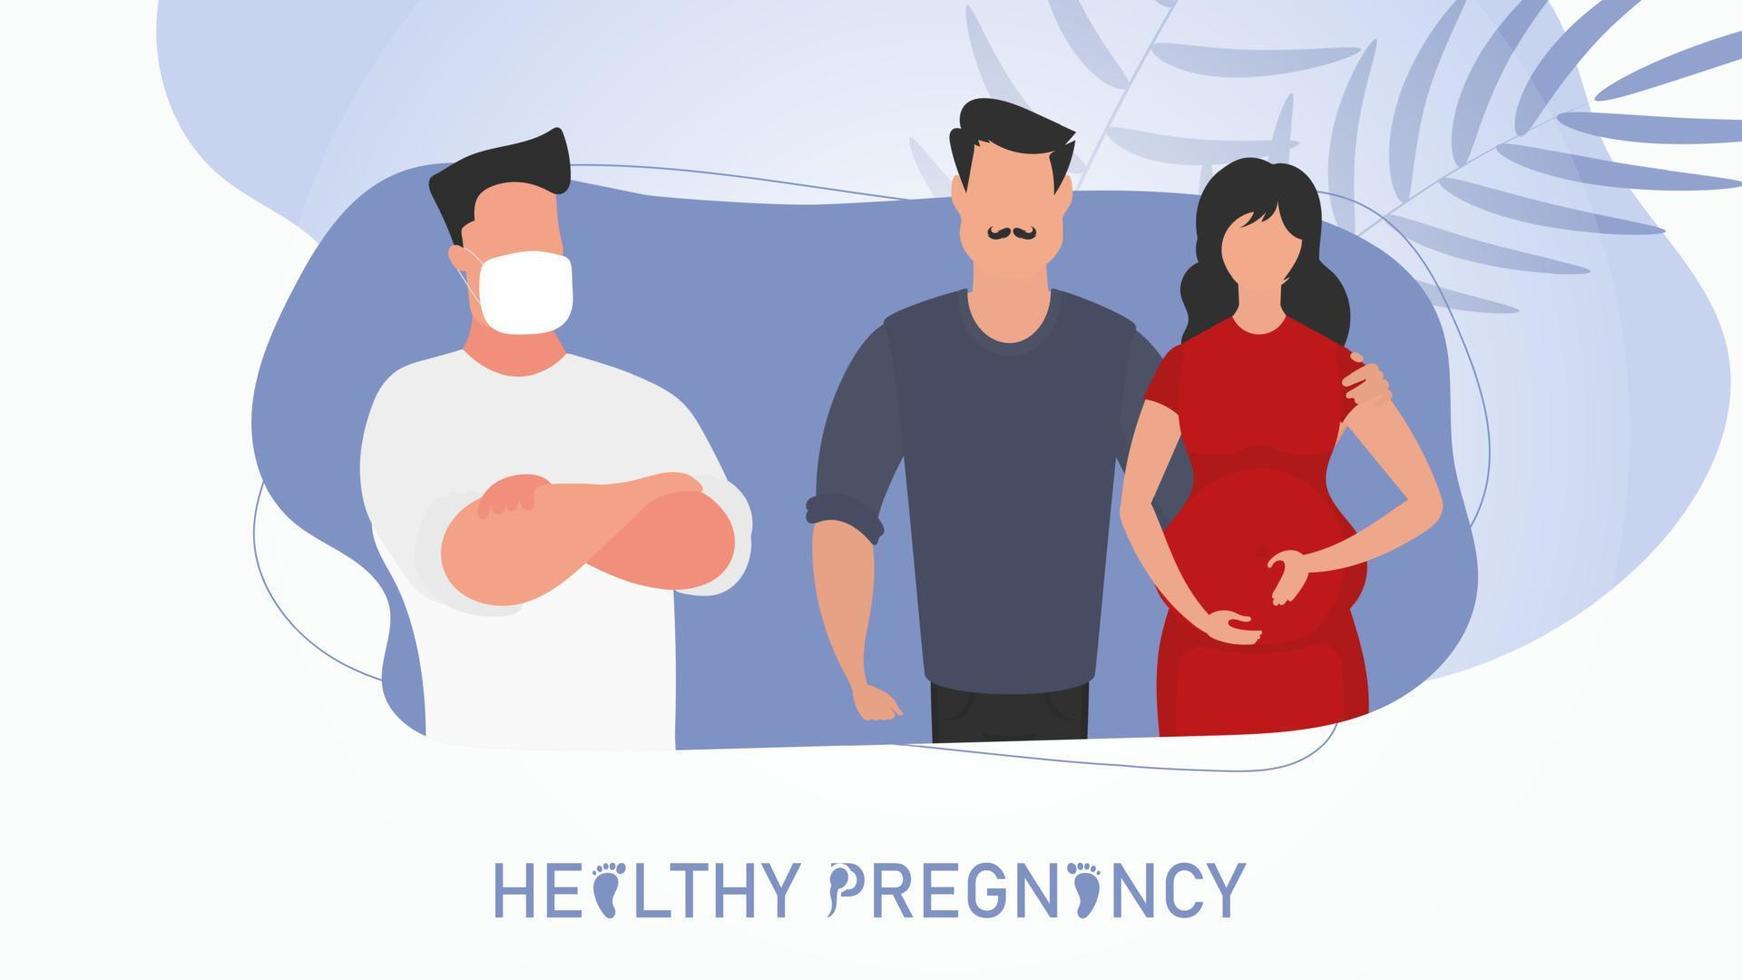 Healthy pregnancy banner. A married couple came to the doctor. Vector illustration.